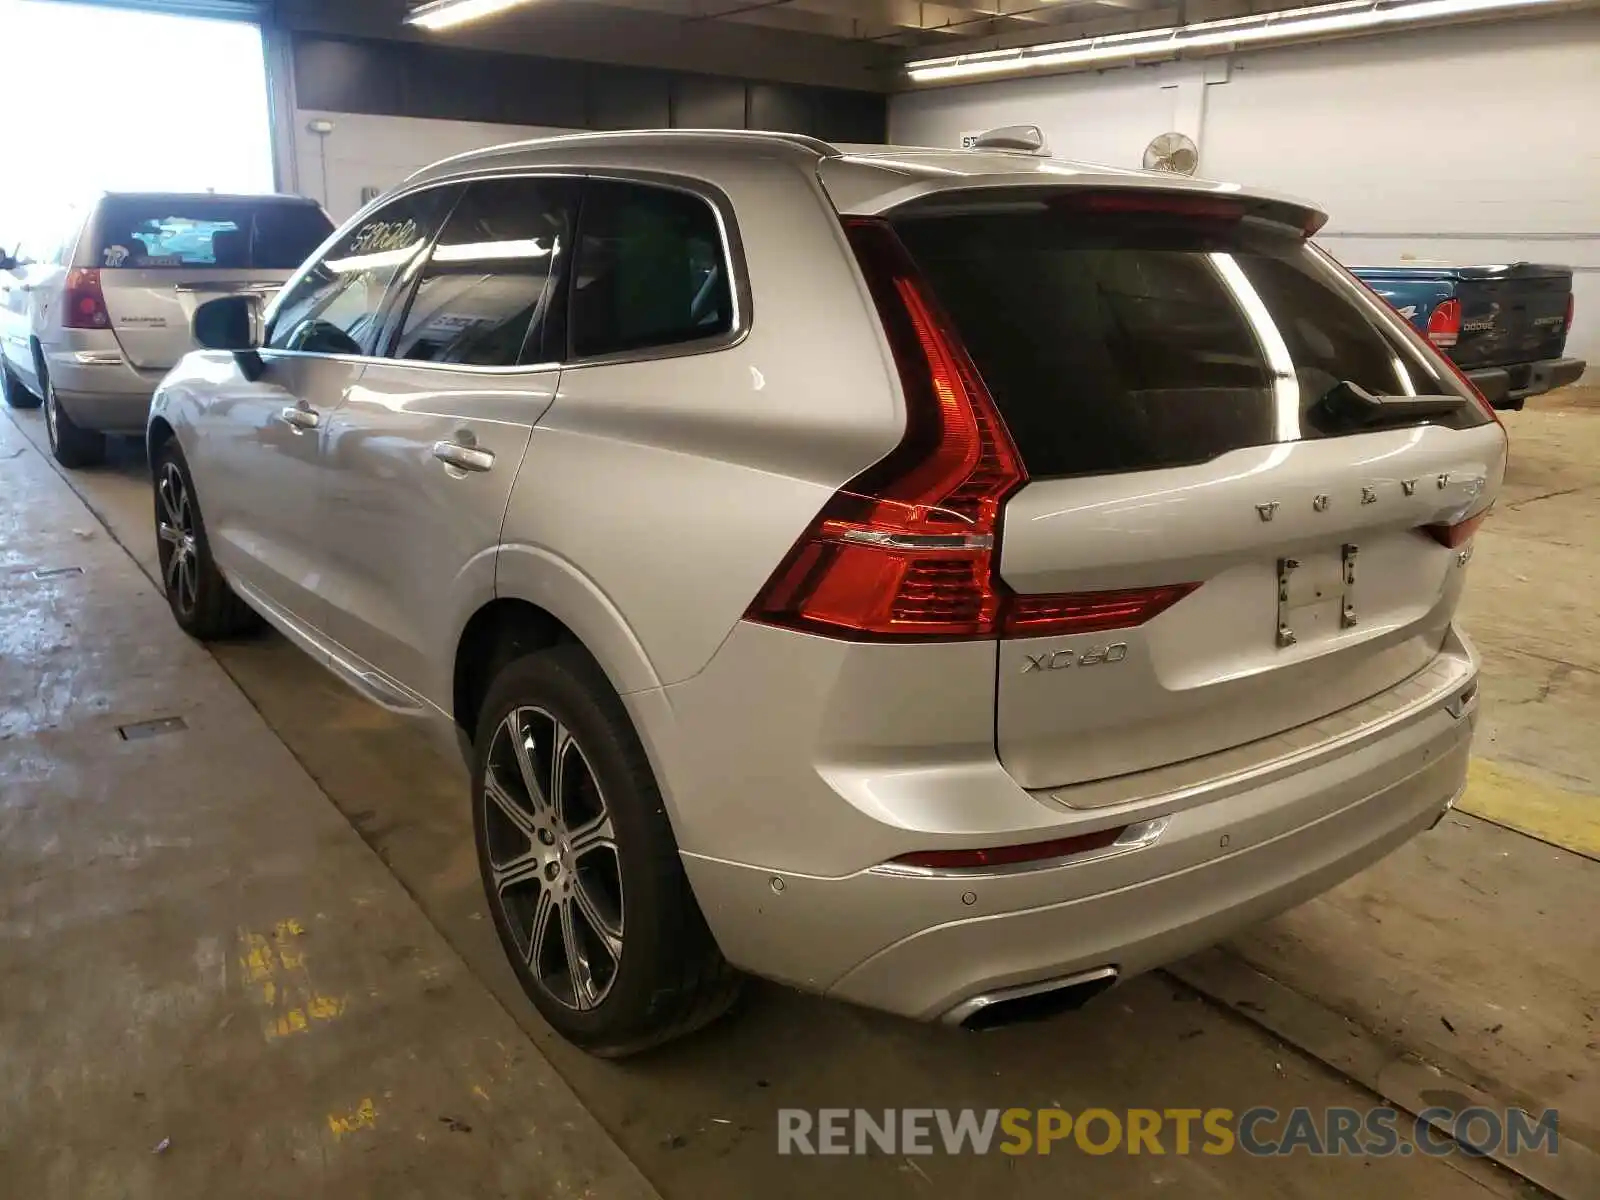 3 Photograph of a damaged car YV4A22RL7K1291629 VOLVO XC60 T6 IN 2019